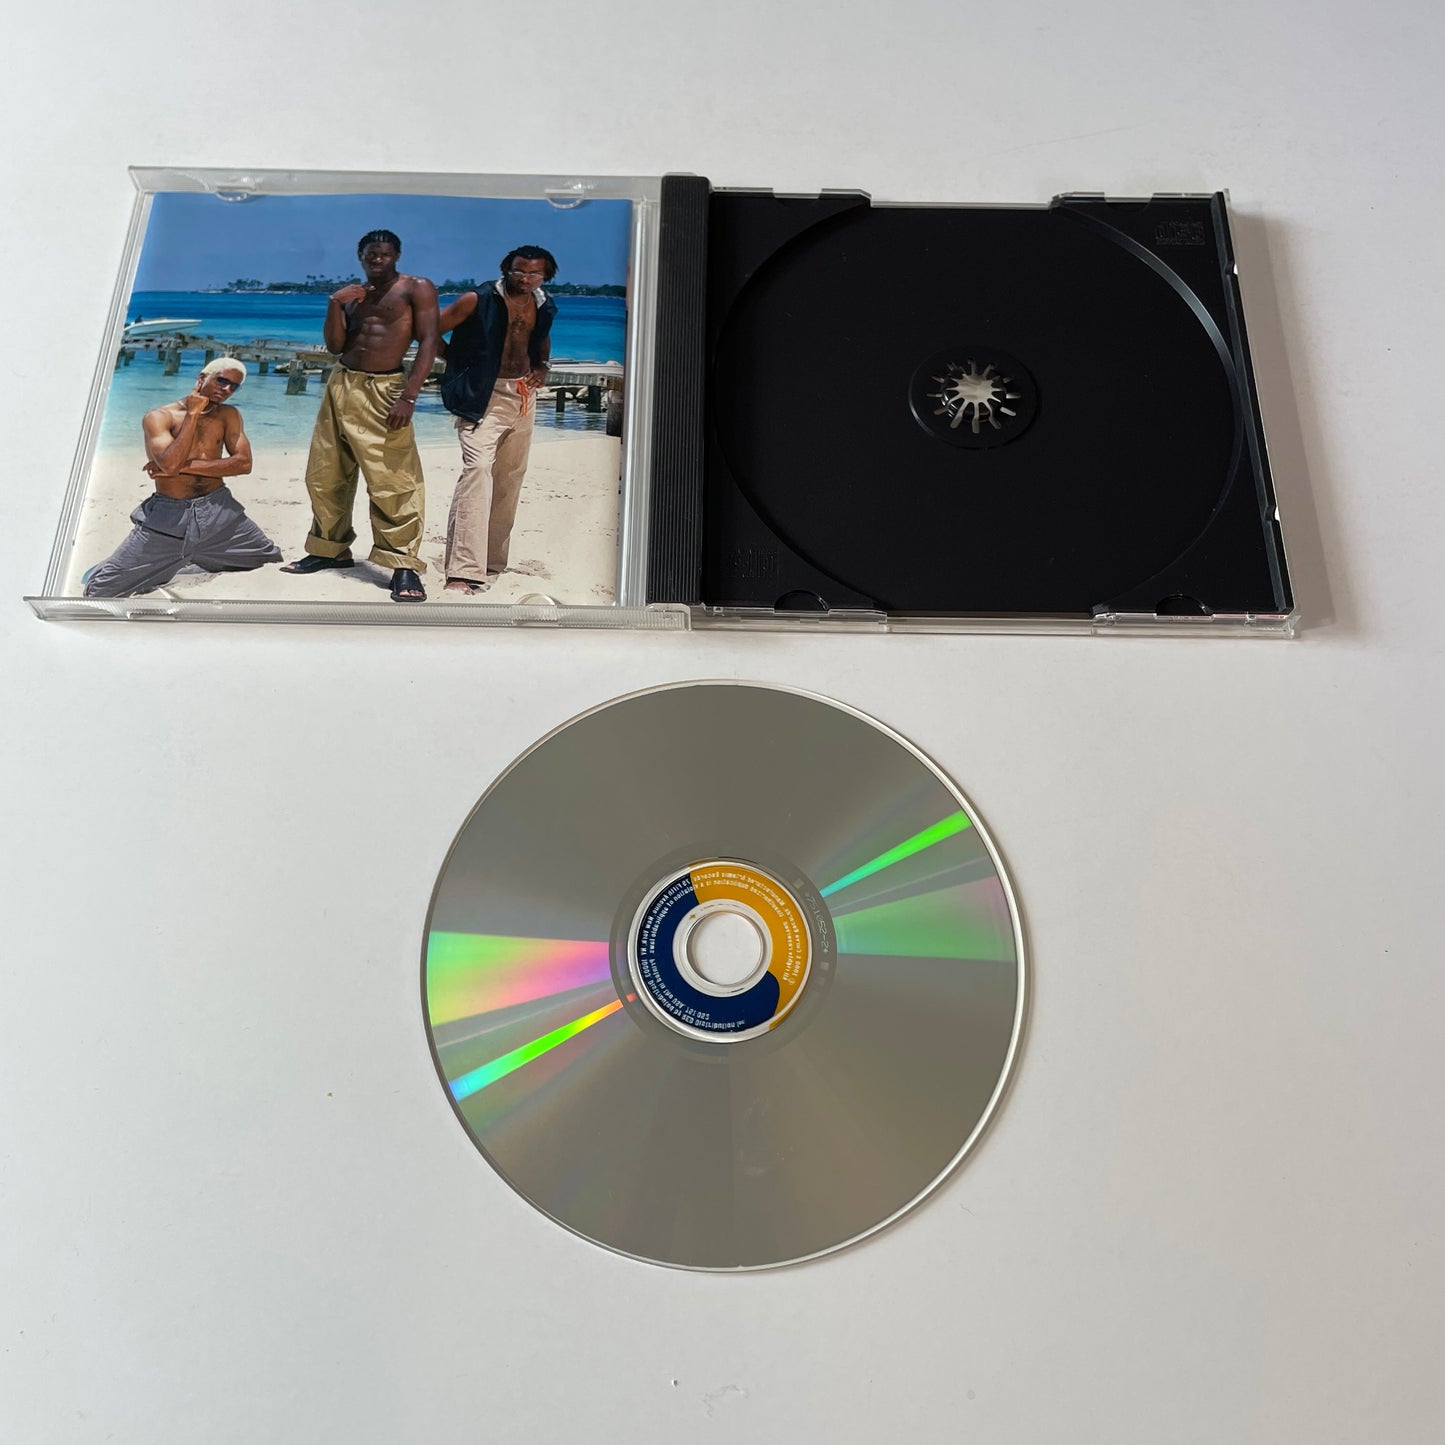 Baha Men Who Let The Dogs Out Used CD VG+\VG+